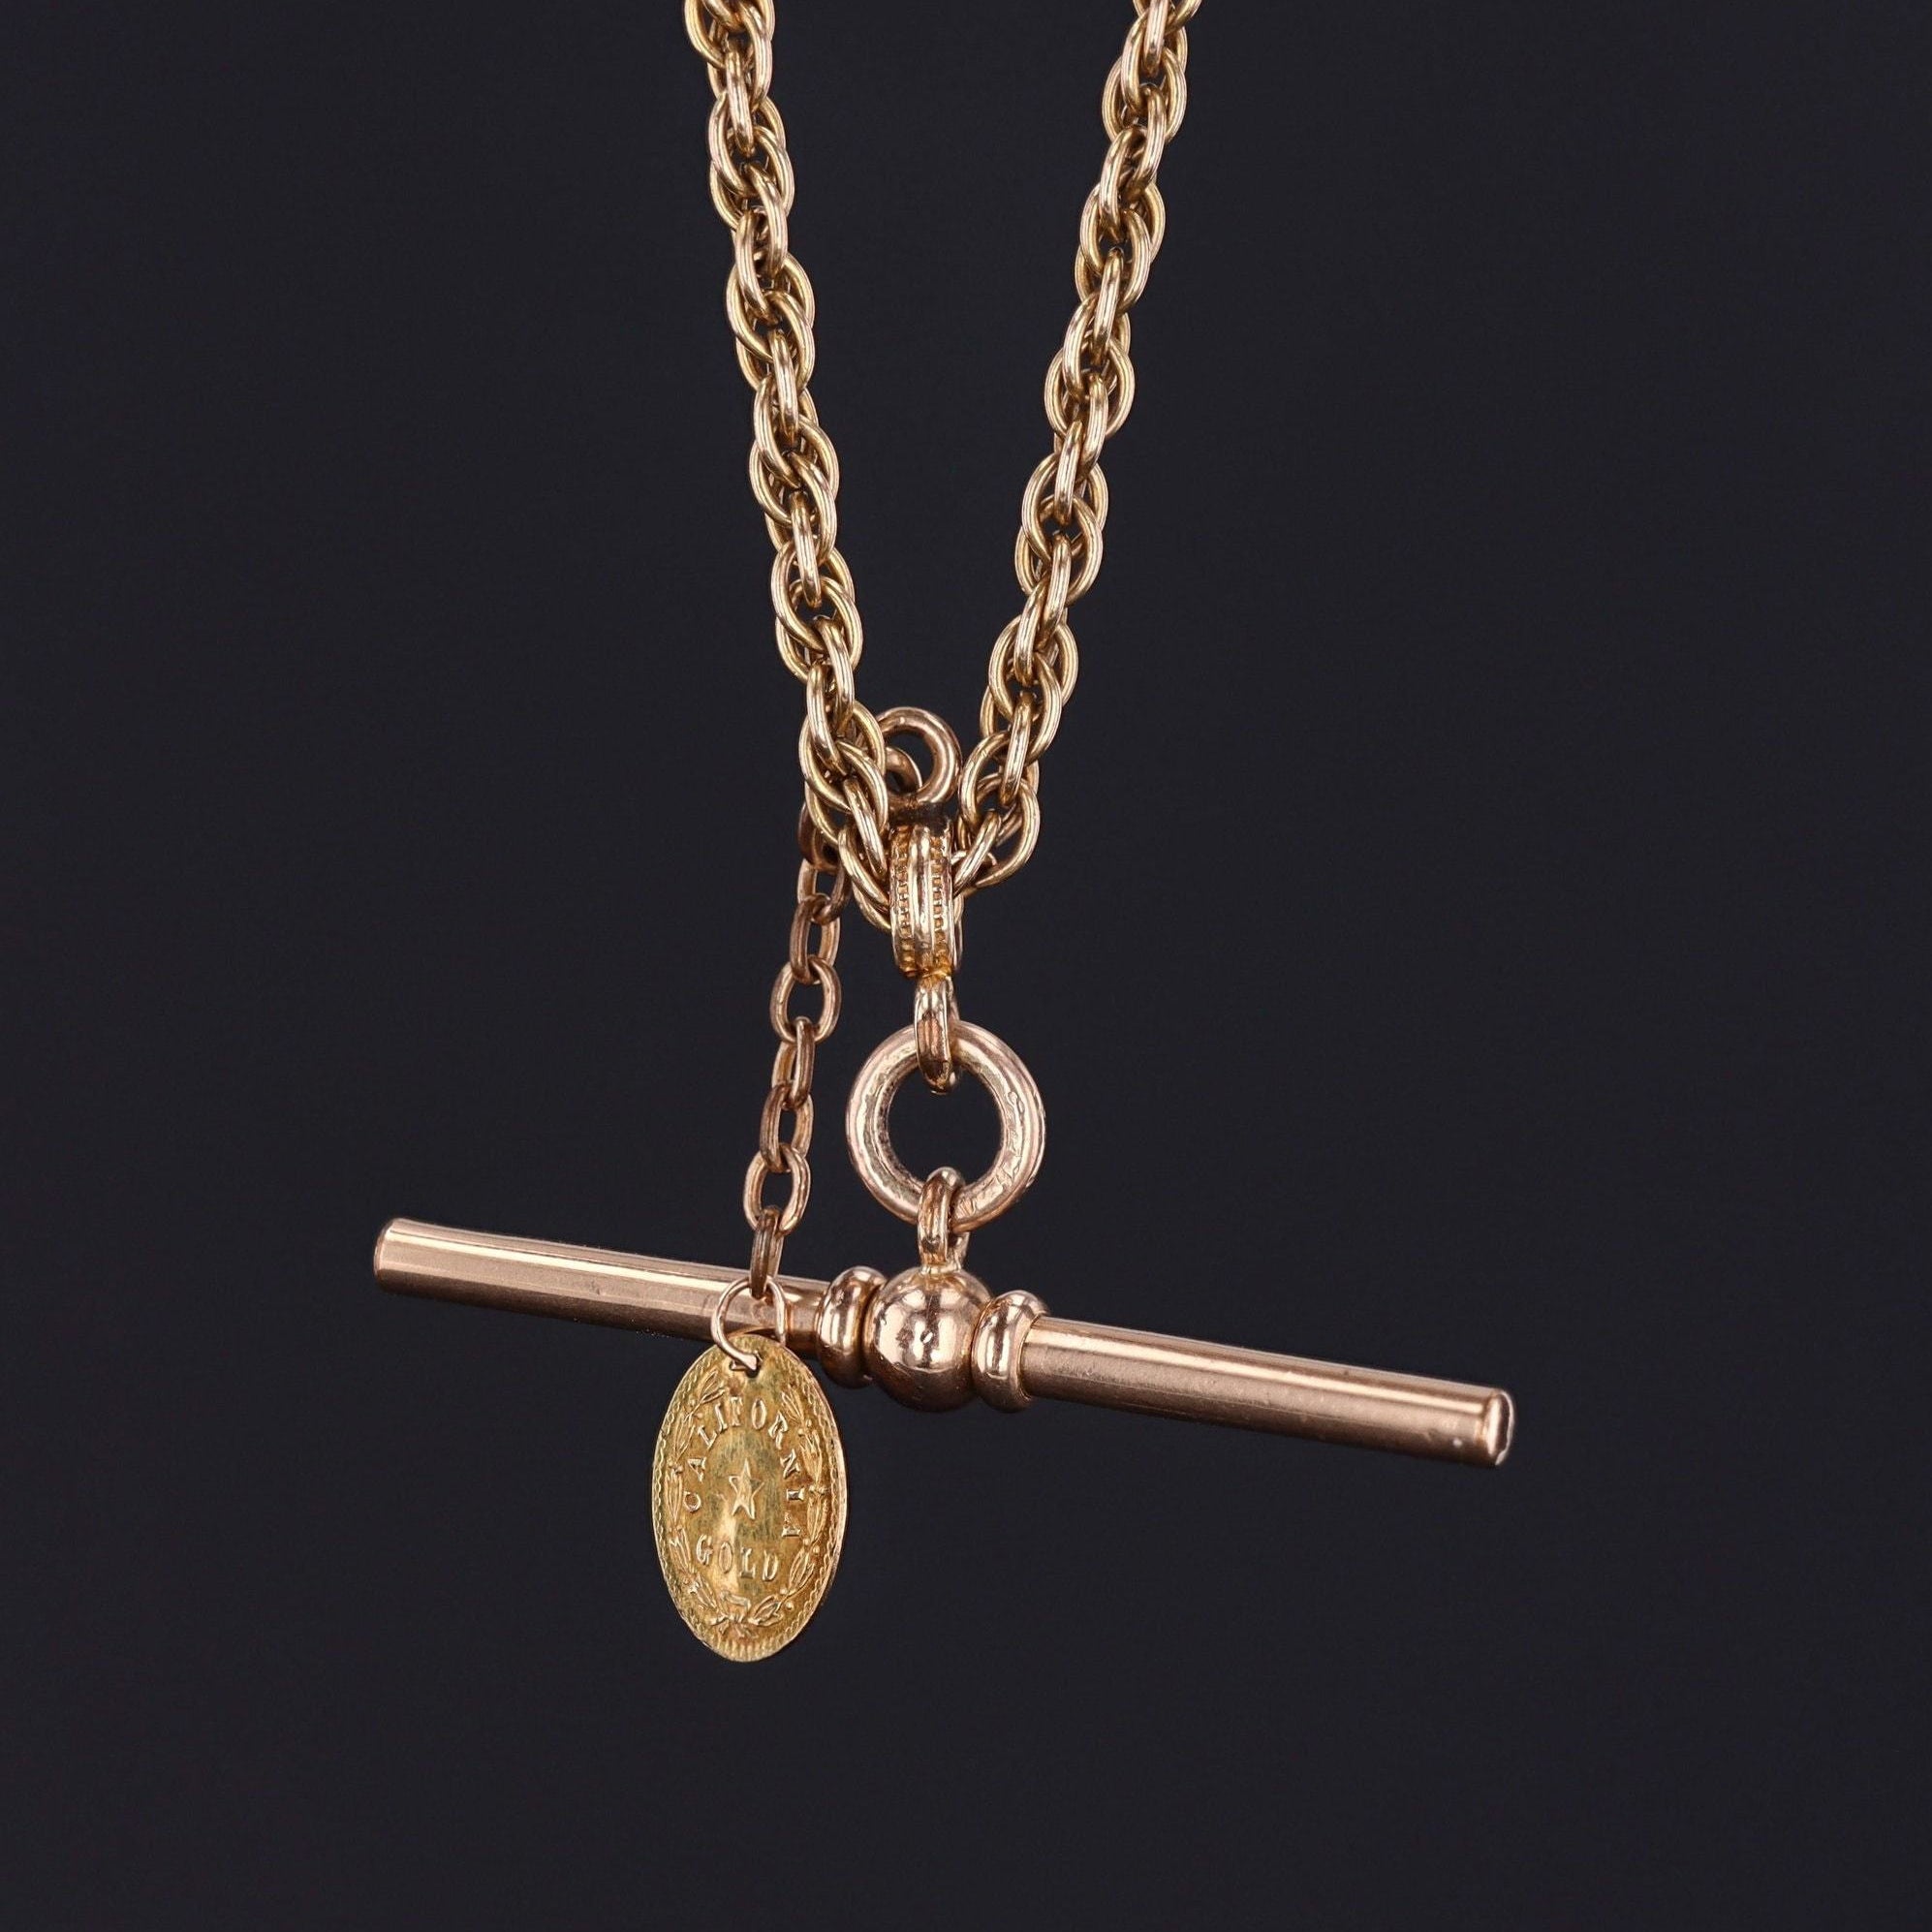 Antique Gold Watch Chain with California Gold Coin | 14k Gold Necklace 